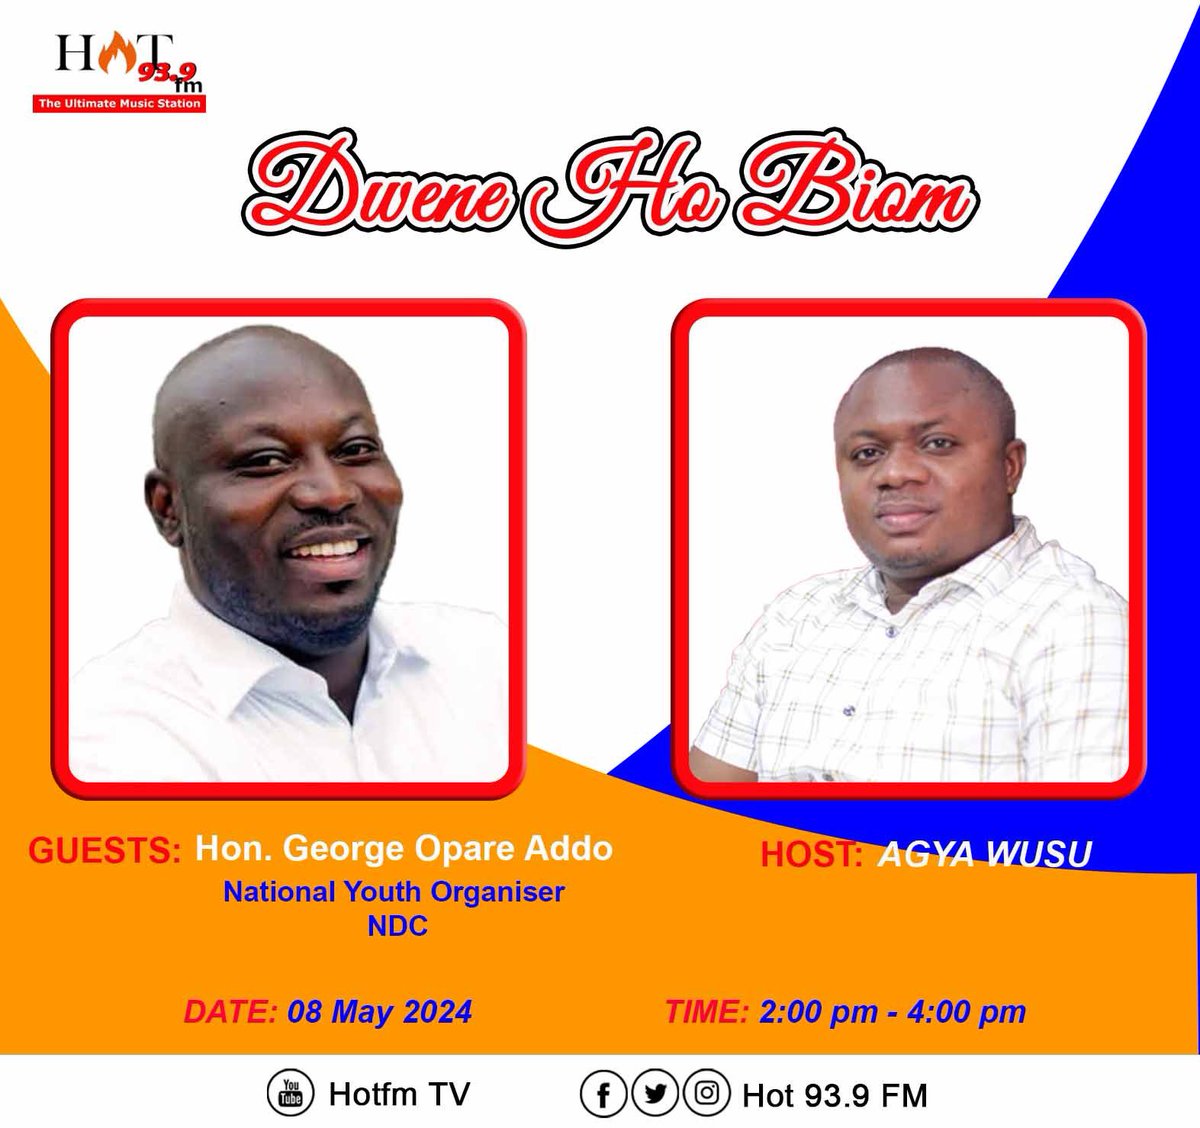 Kindly make a date with the field marshal this afternoon on Hot Fm 93.9 as he joins the host of “Dwen Ho Biom” to discuss the limited registration exercise and other issues of national interest. #YouthPower